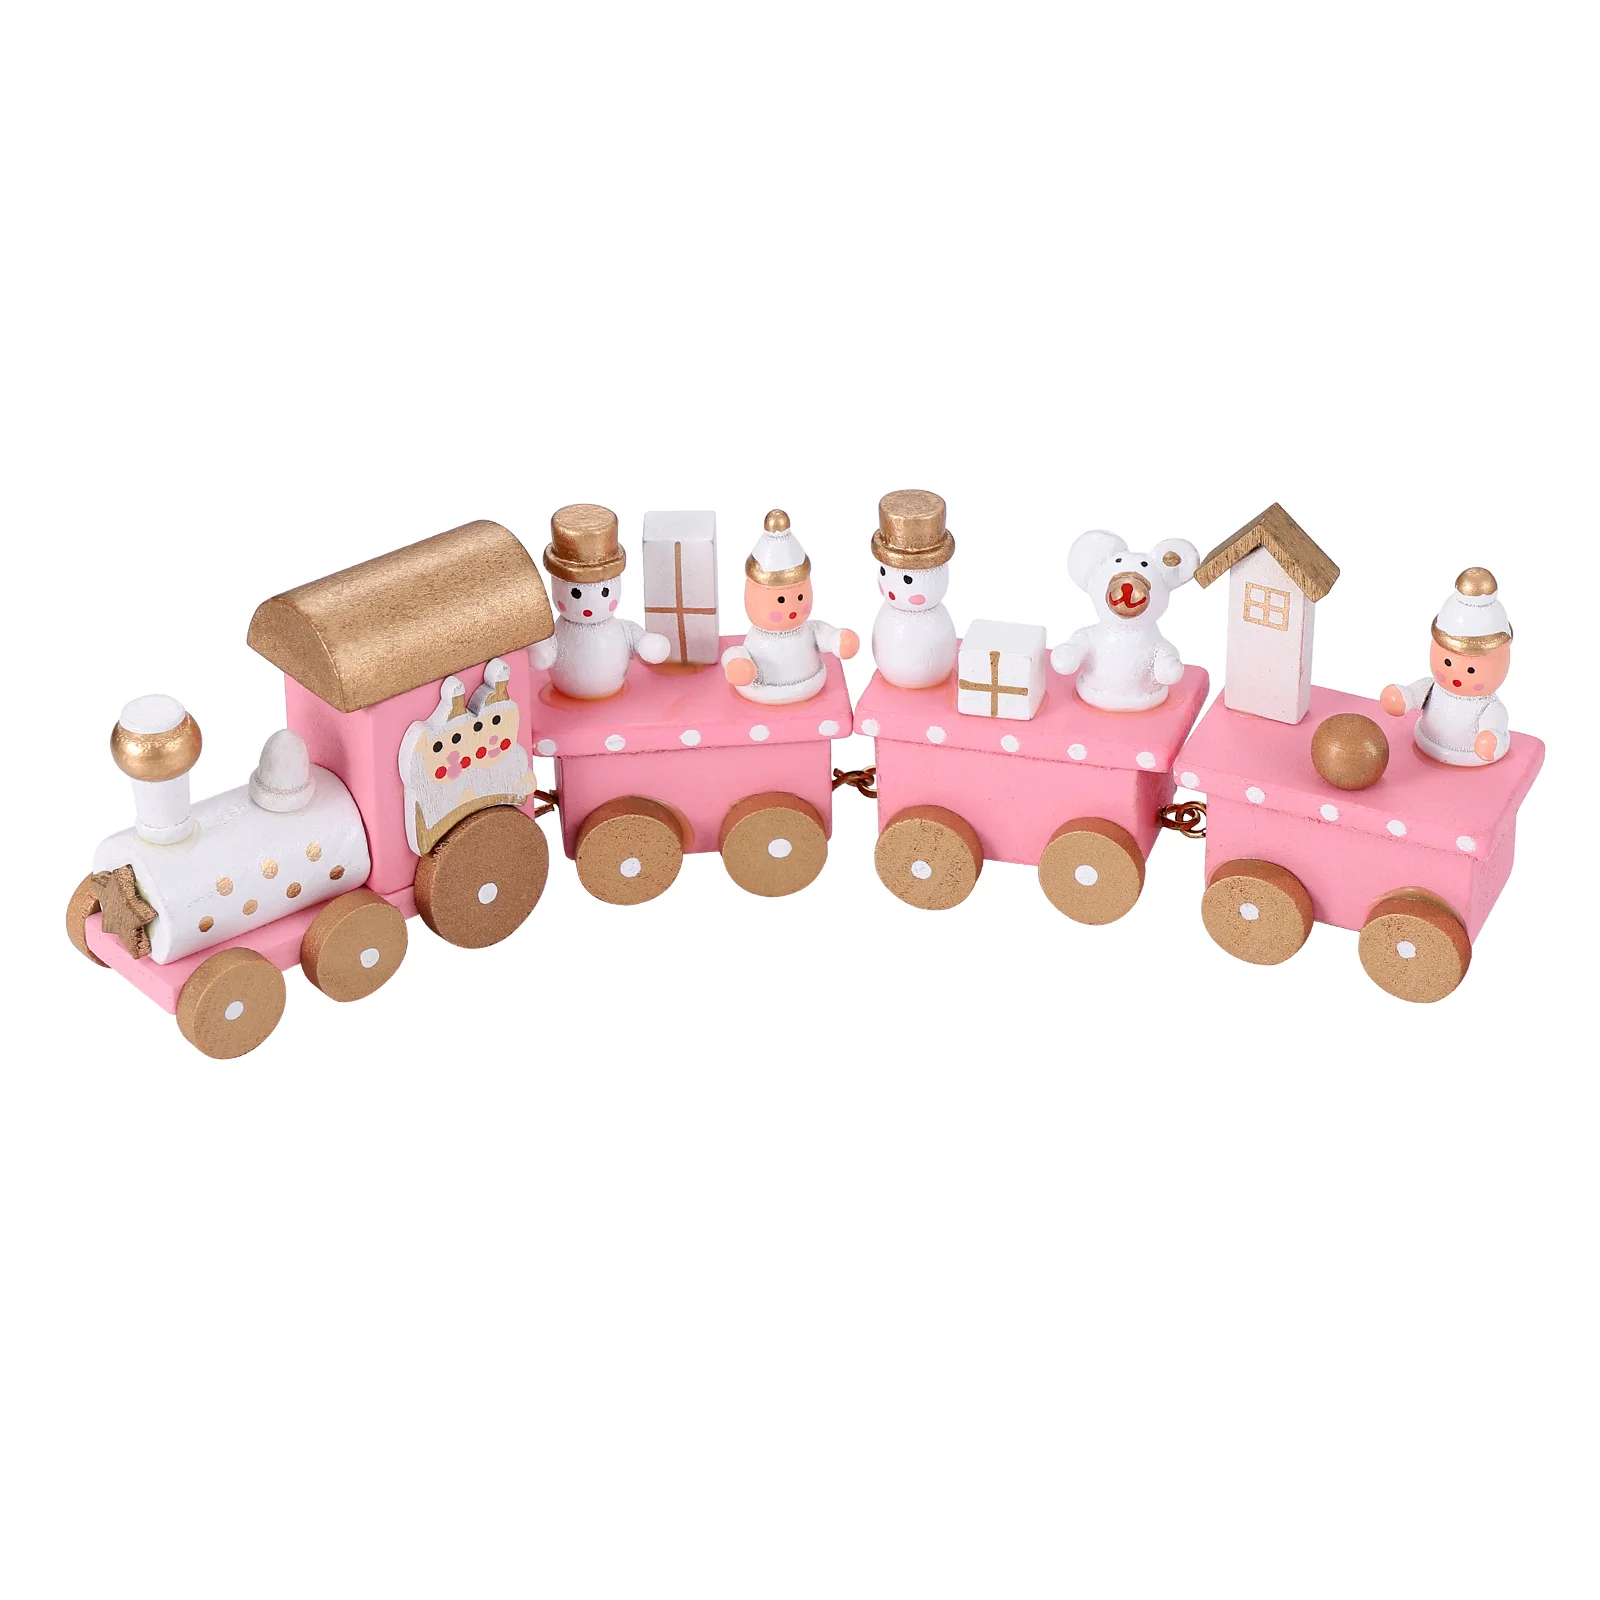 

Xmas Train Set Small Christmas Pink Home Decor Around Tree Wooden Dining Room Table